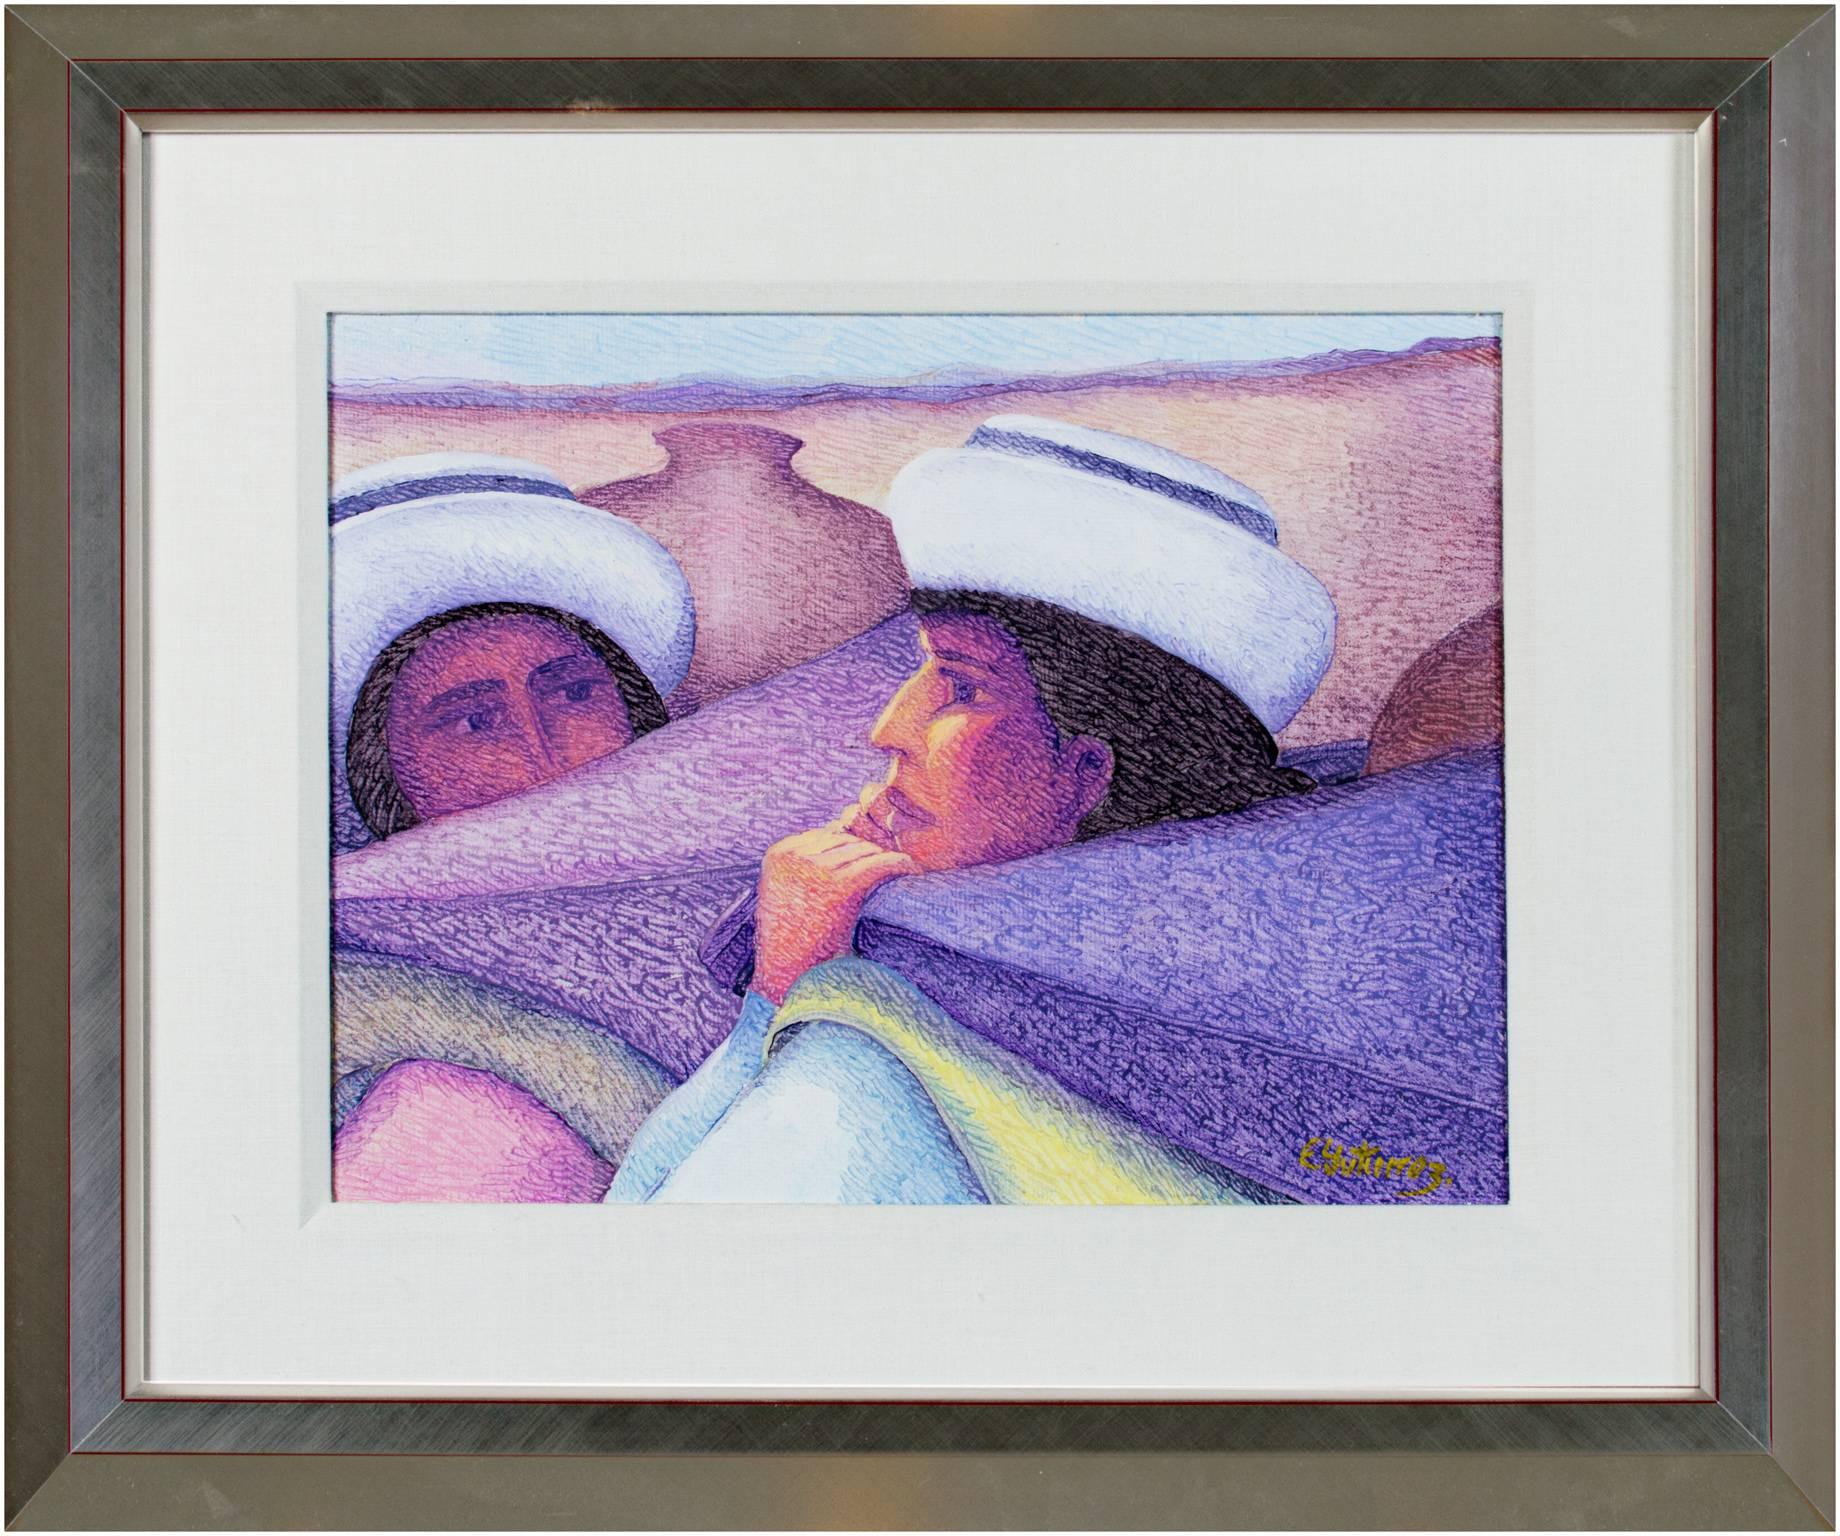 "Dos Mujeres (Two Ladies), "an Oil on Jute by Ernesto Gutierrez